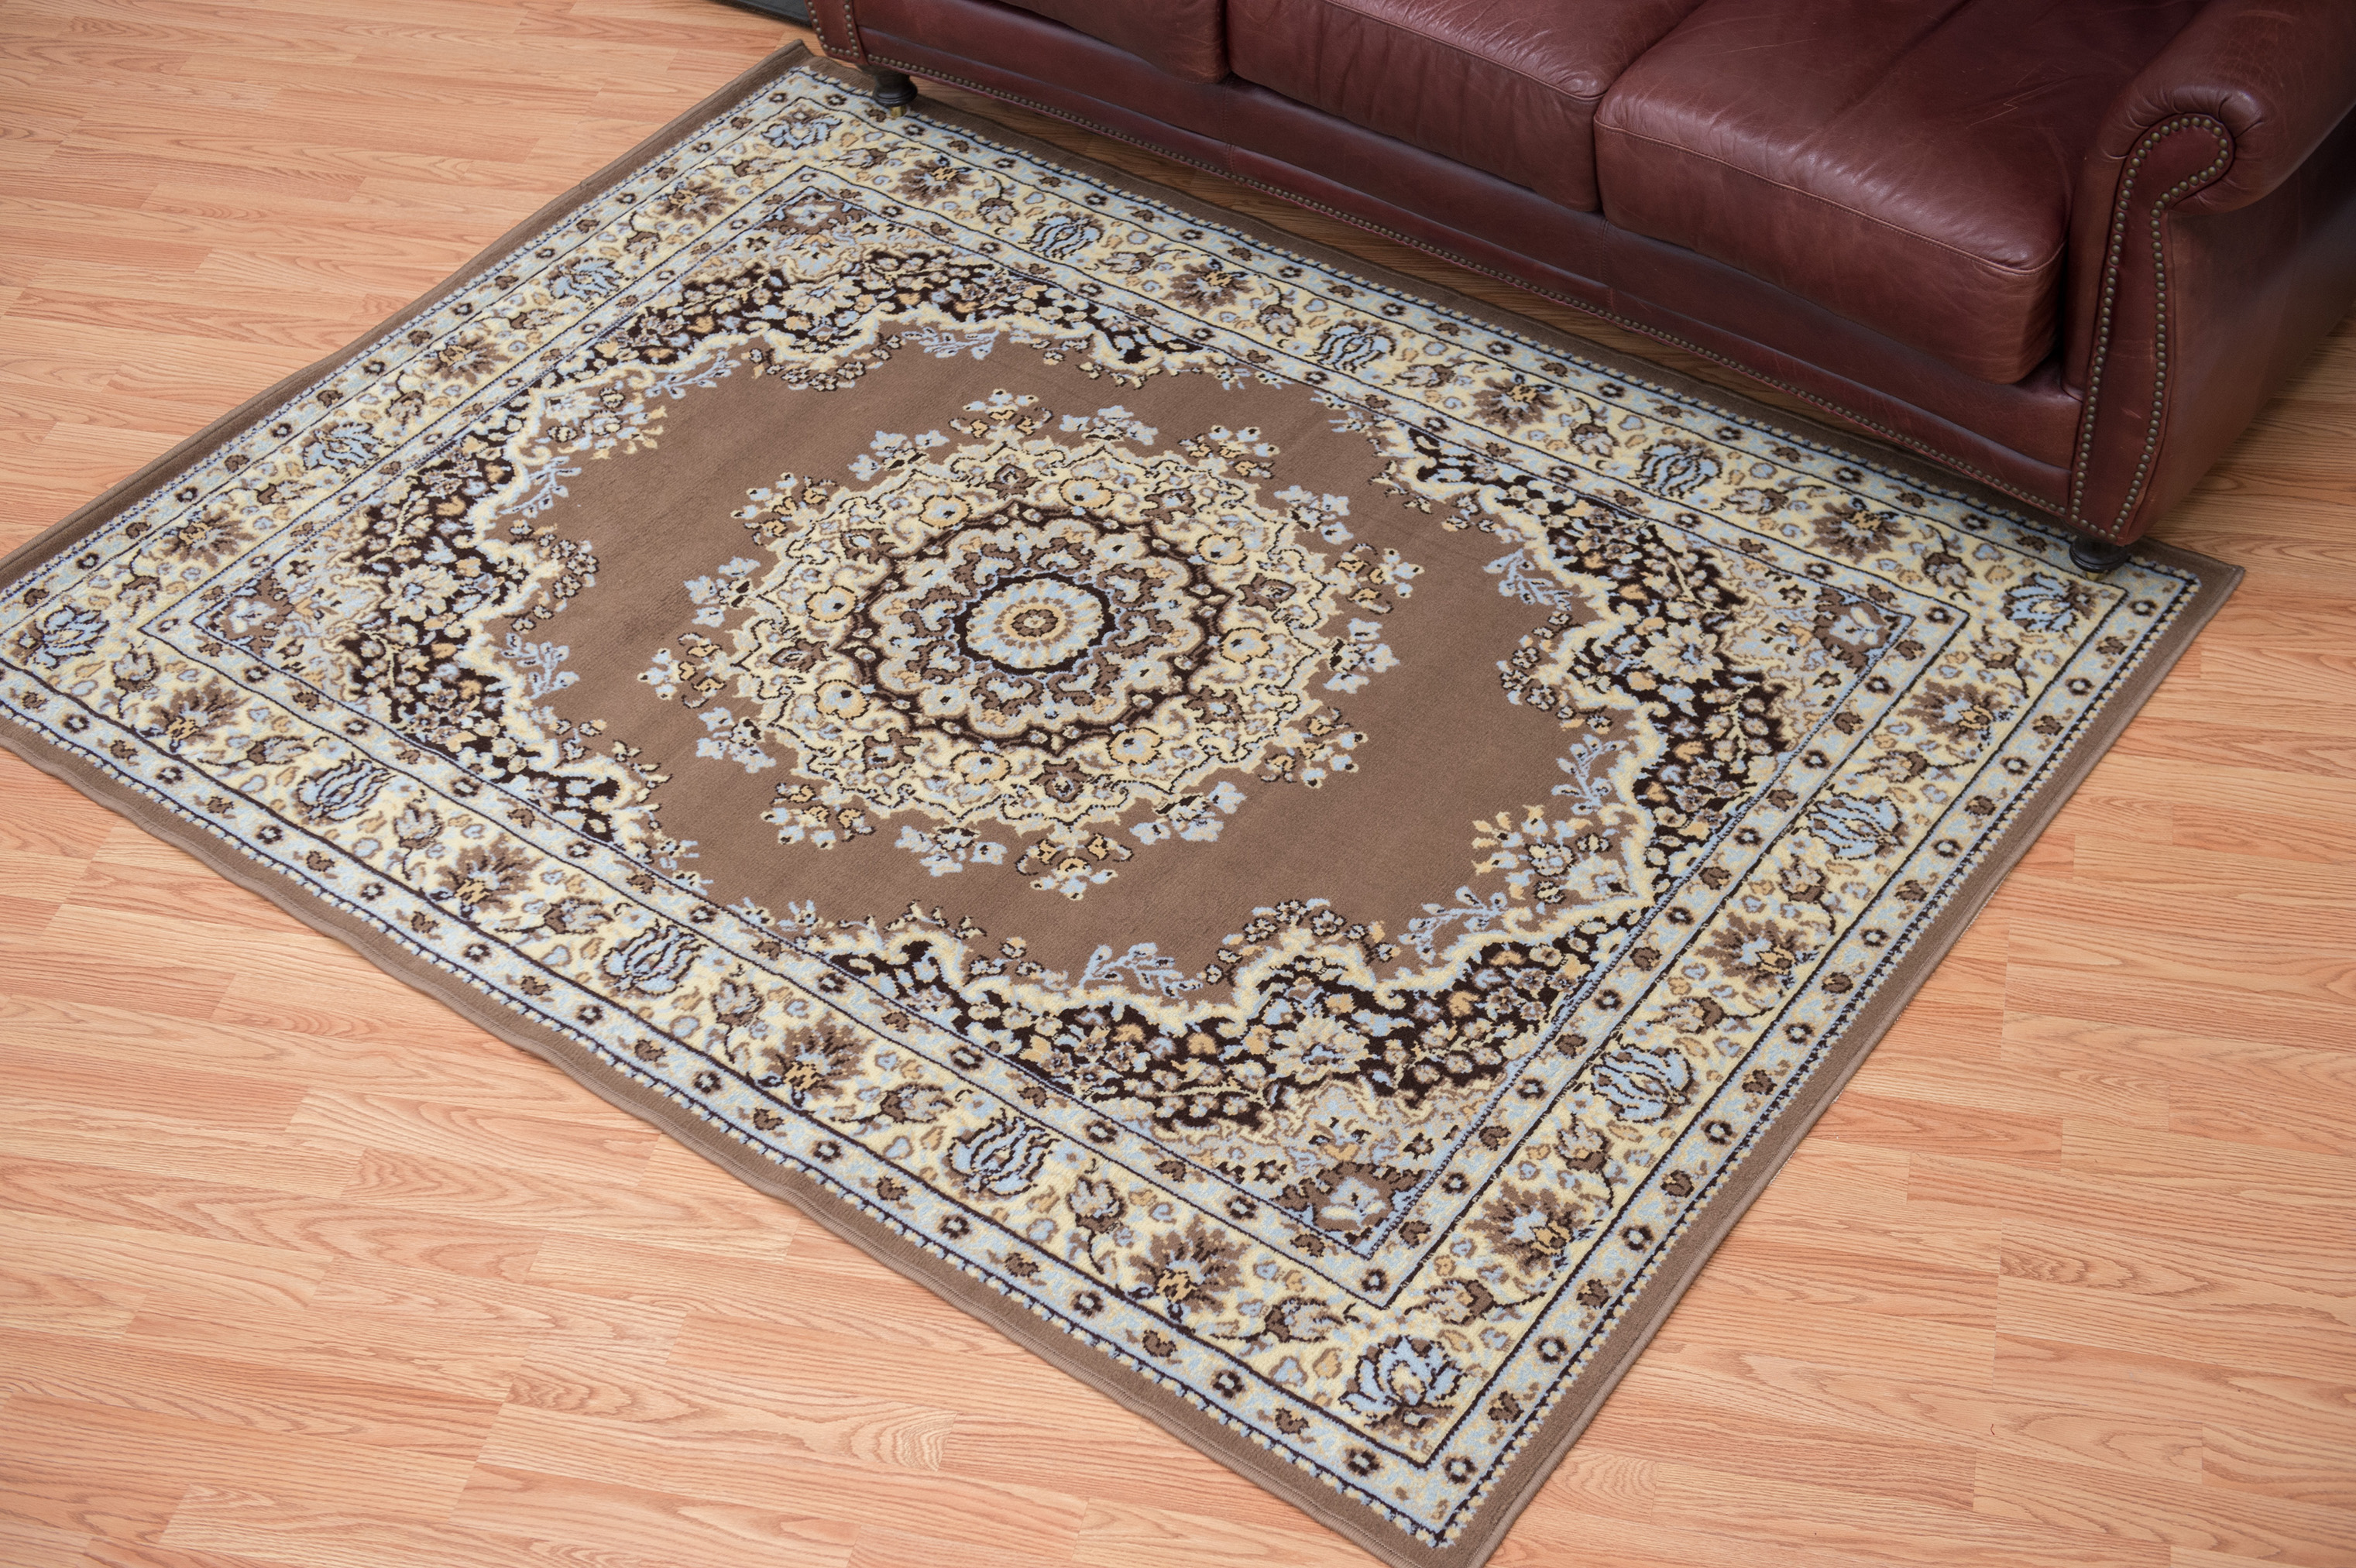 Designer Home Soft Traditional Oriental Area Rug with Center Medallion Actual Size 7' 10" x 10' 6" Rectangle (Ash Beige) - image 1 of 5